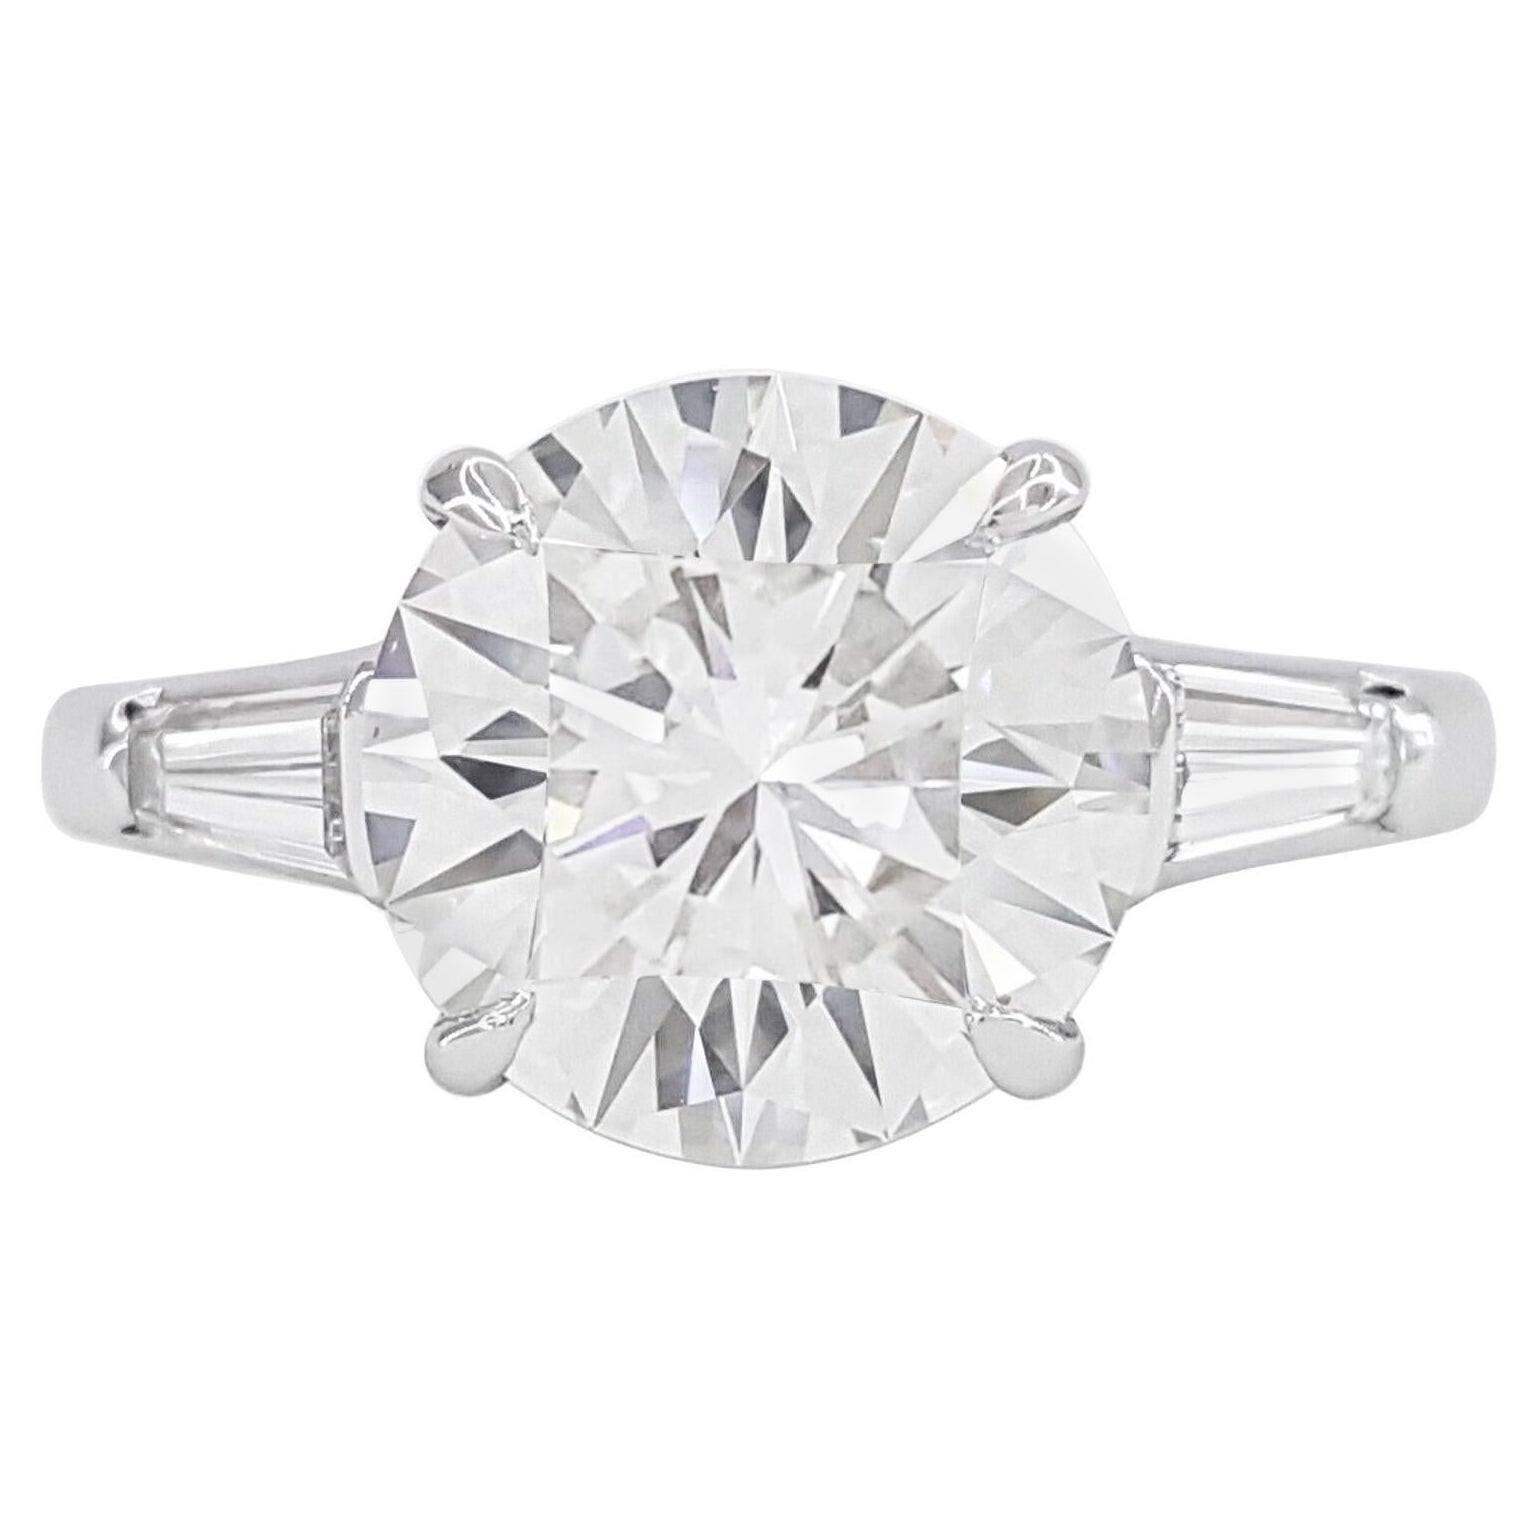 EXCEPTIONAL GIA Certified 2 Carat Round Brilliant Cut Diamond F COLOR FLAWLESS 